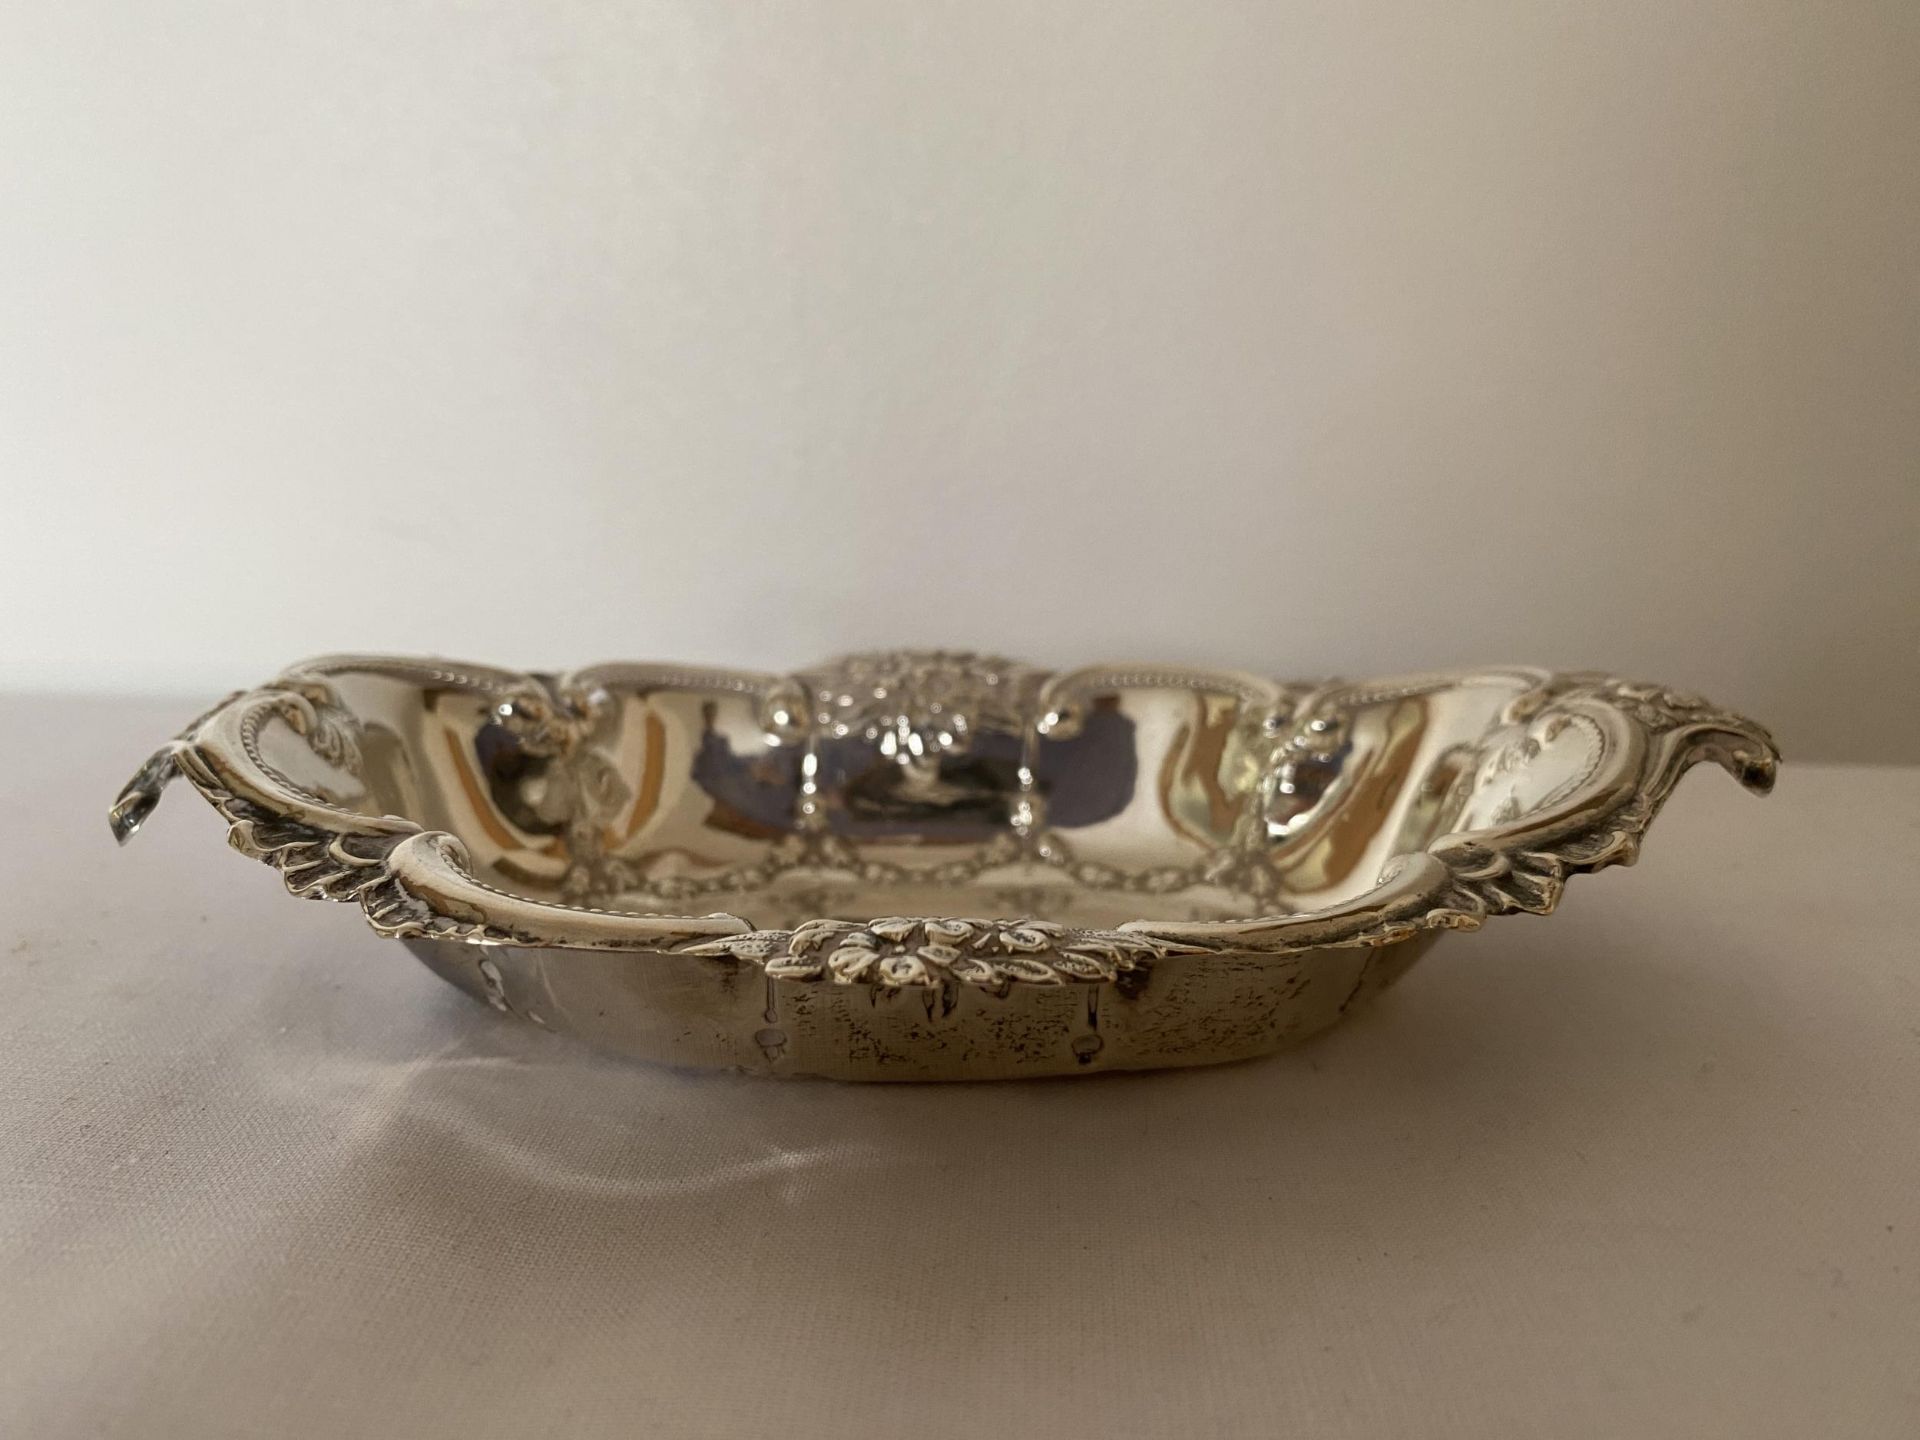 A 1901 HALLMARKED CHESTER SILVER DISH, MAKER GEORGE NATHAN & RIDLEY HAYES, GROSS WEIGHT 27 GRAMS - Image 8 of 21